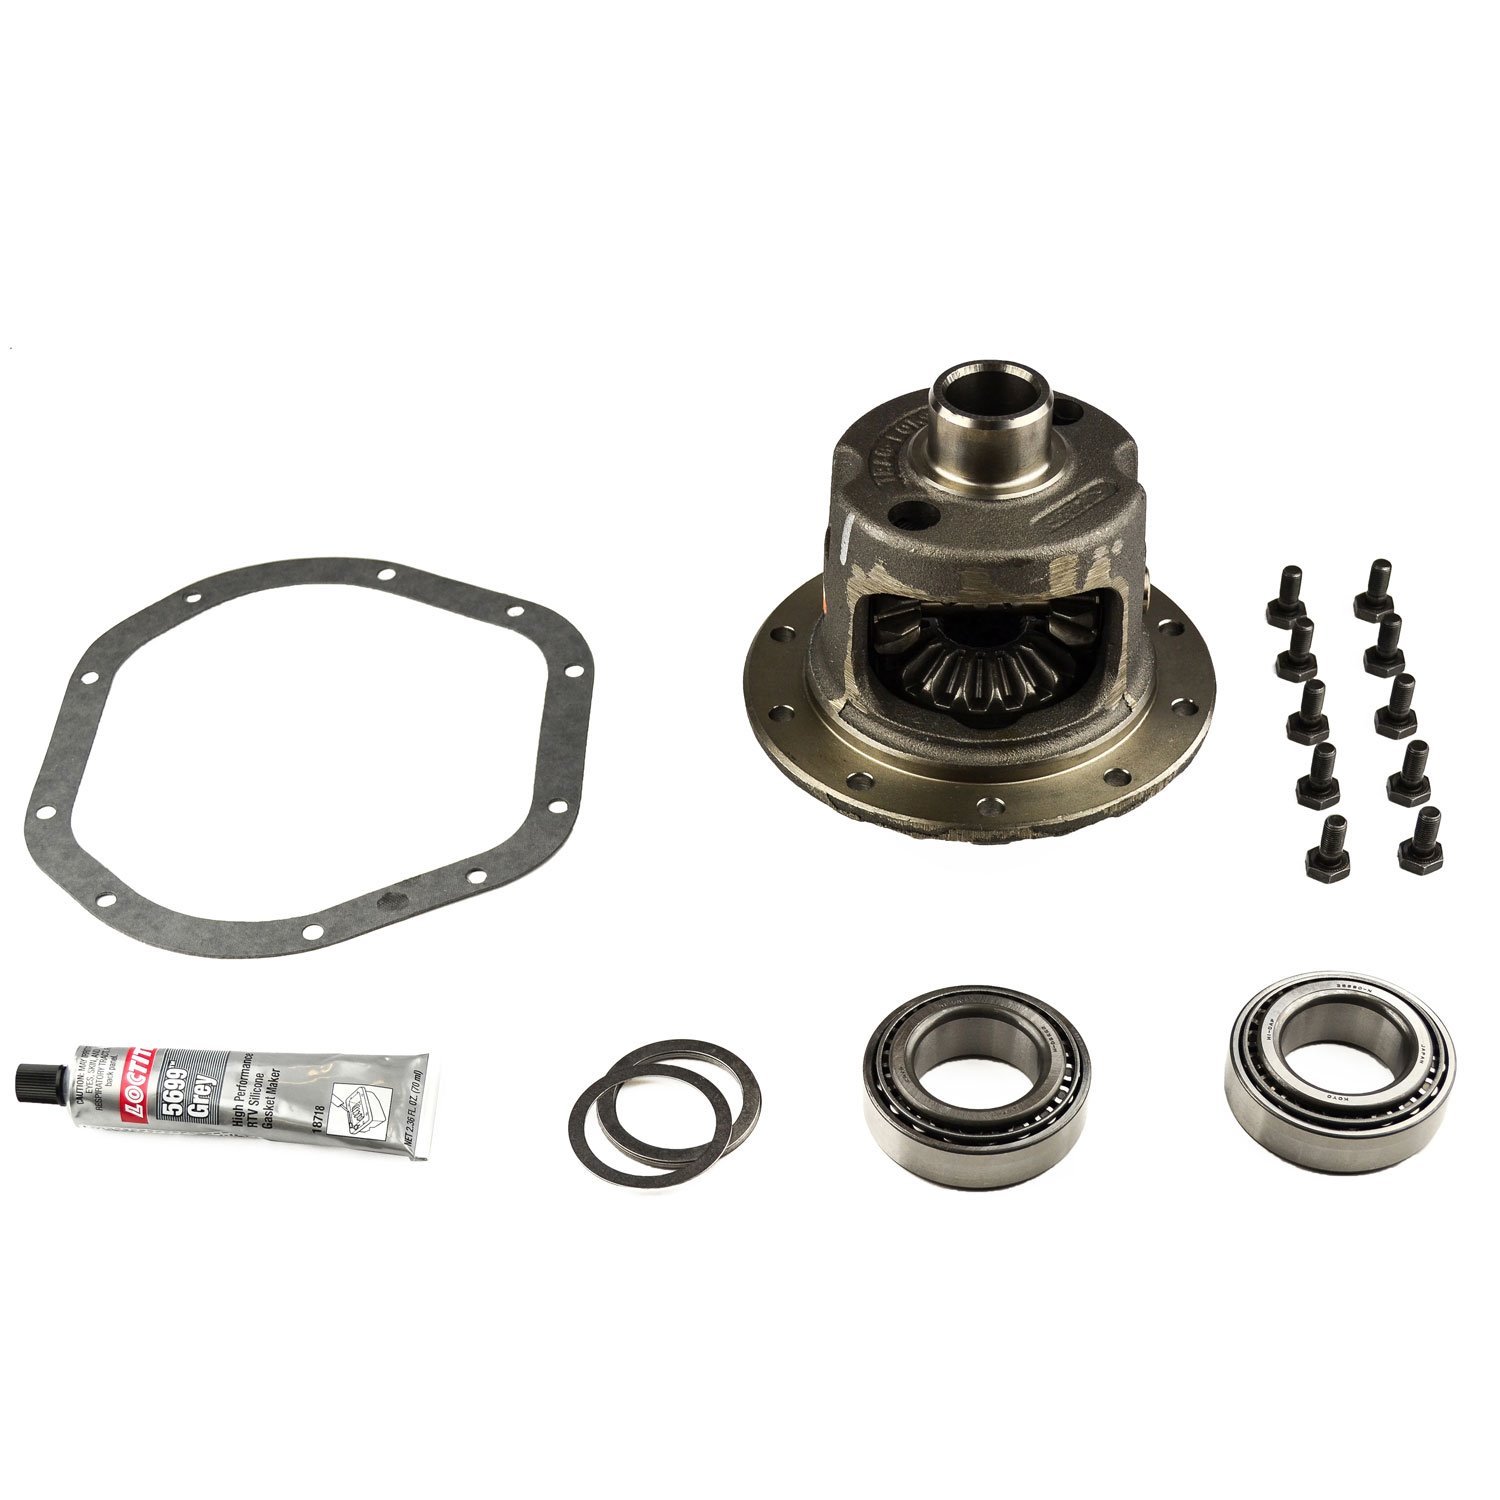 Differential Carrier Case Kit Fits: Dana 44 Limited Slip Differential